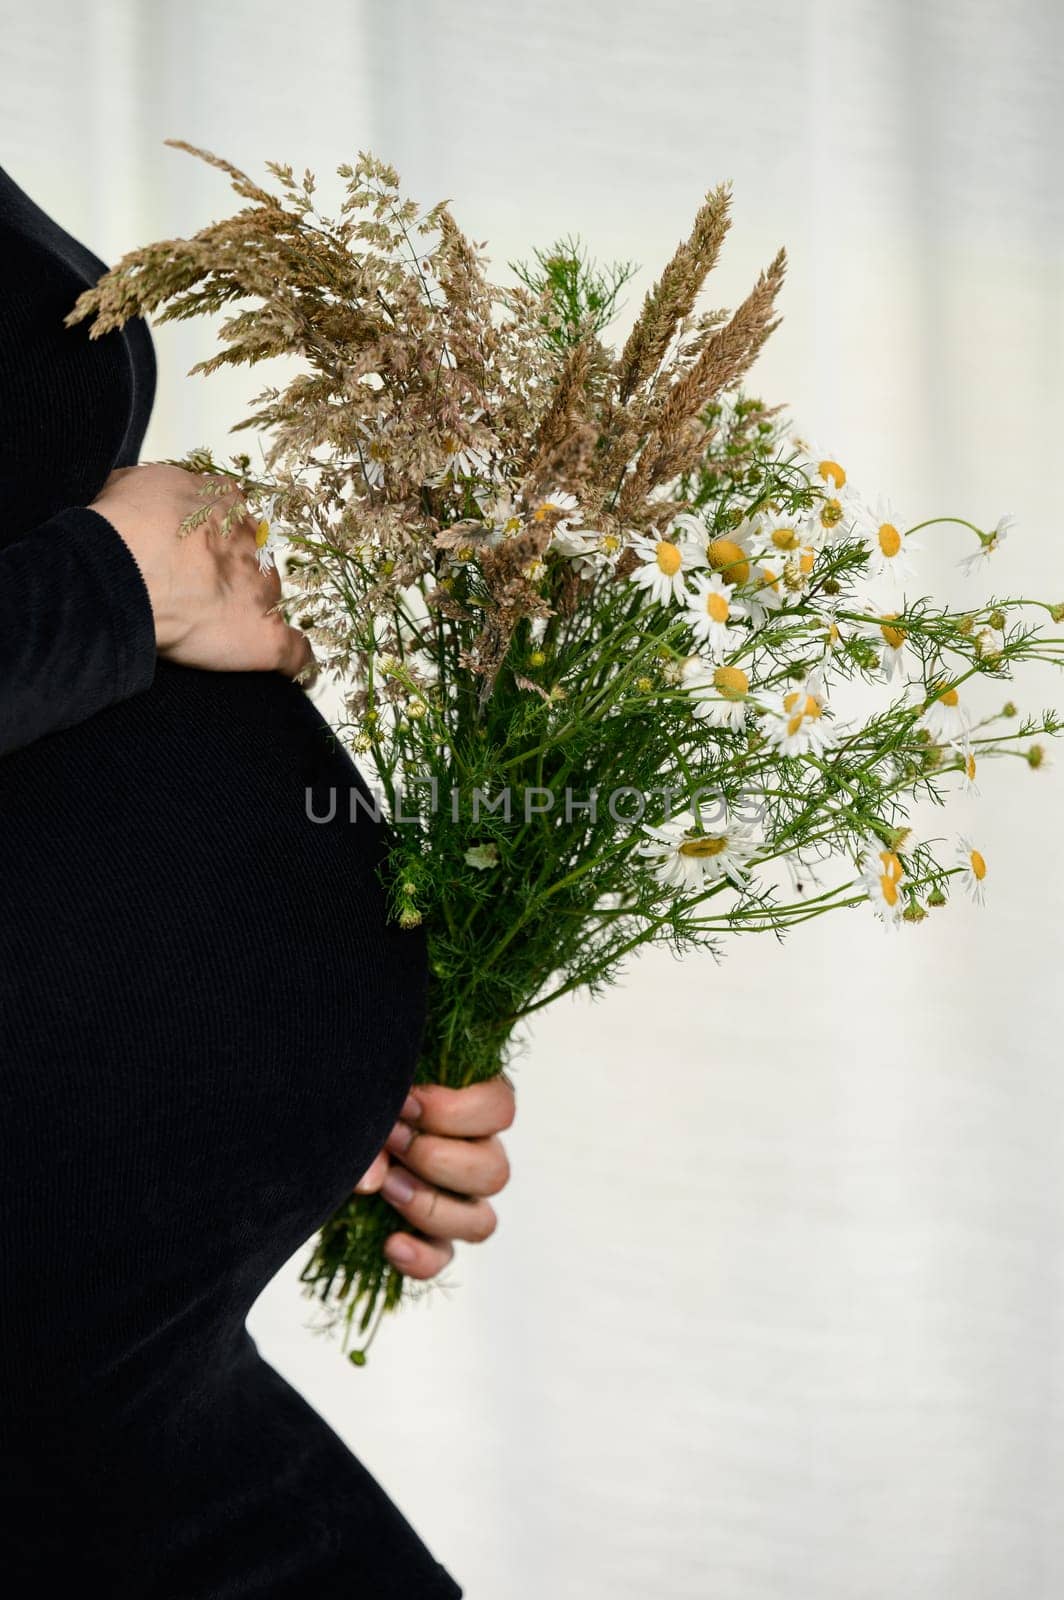 A pregnant woman is hugging her belly against a white background and wearing a black bodycon dress and holding a bouquet of wildflowers in one hand.